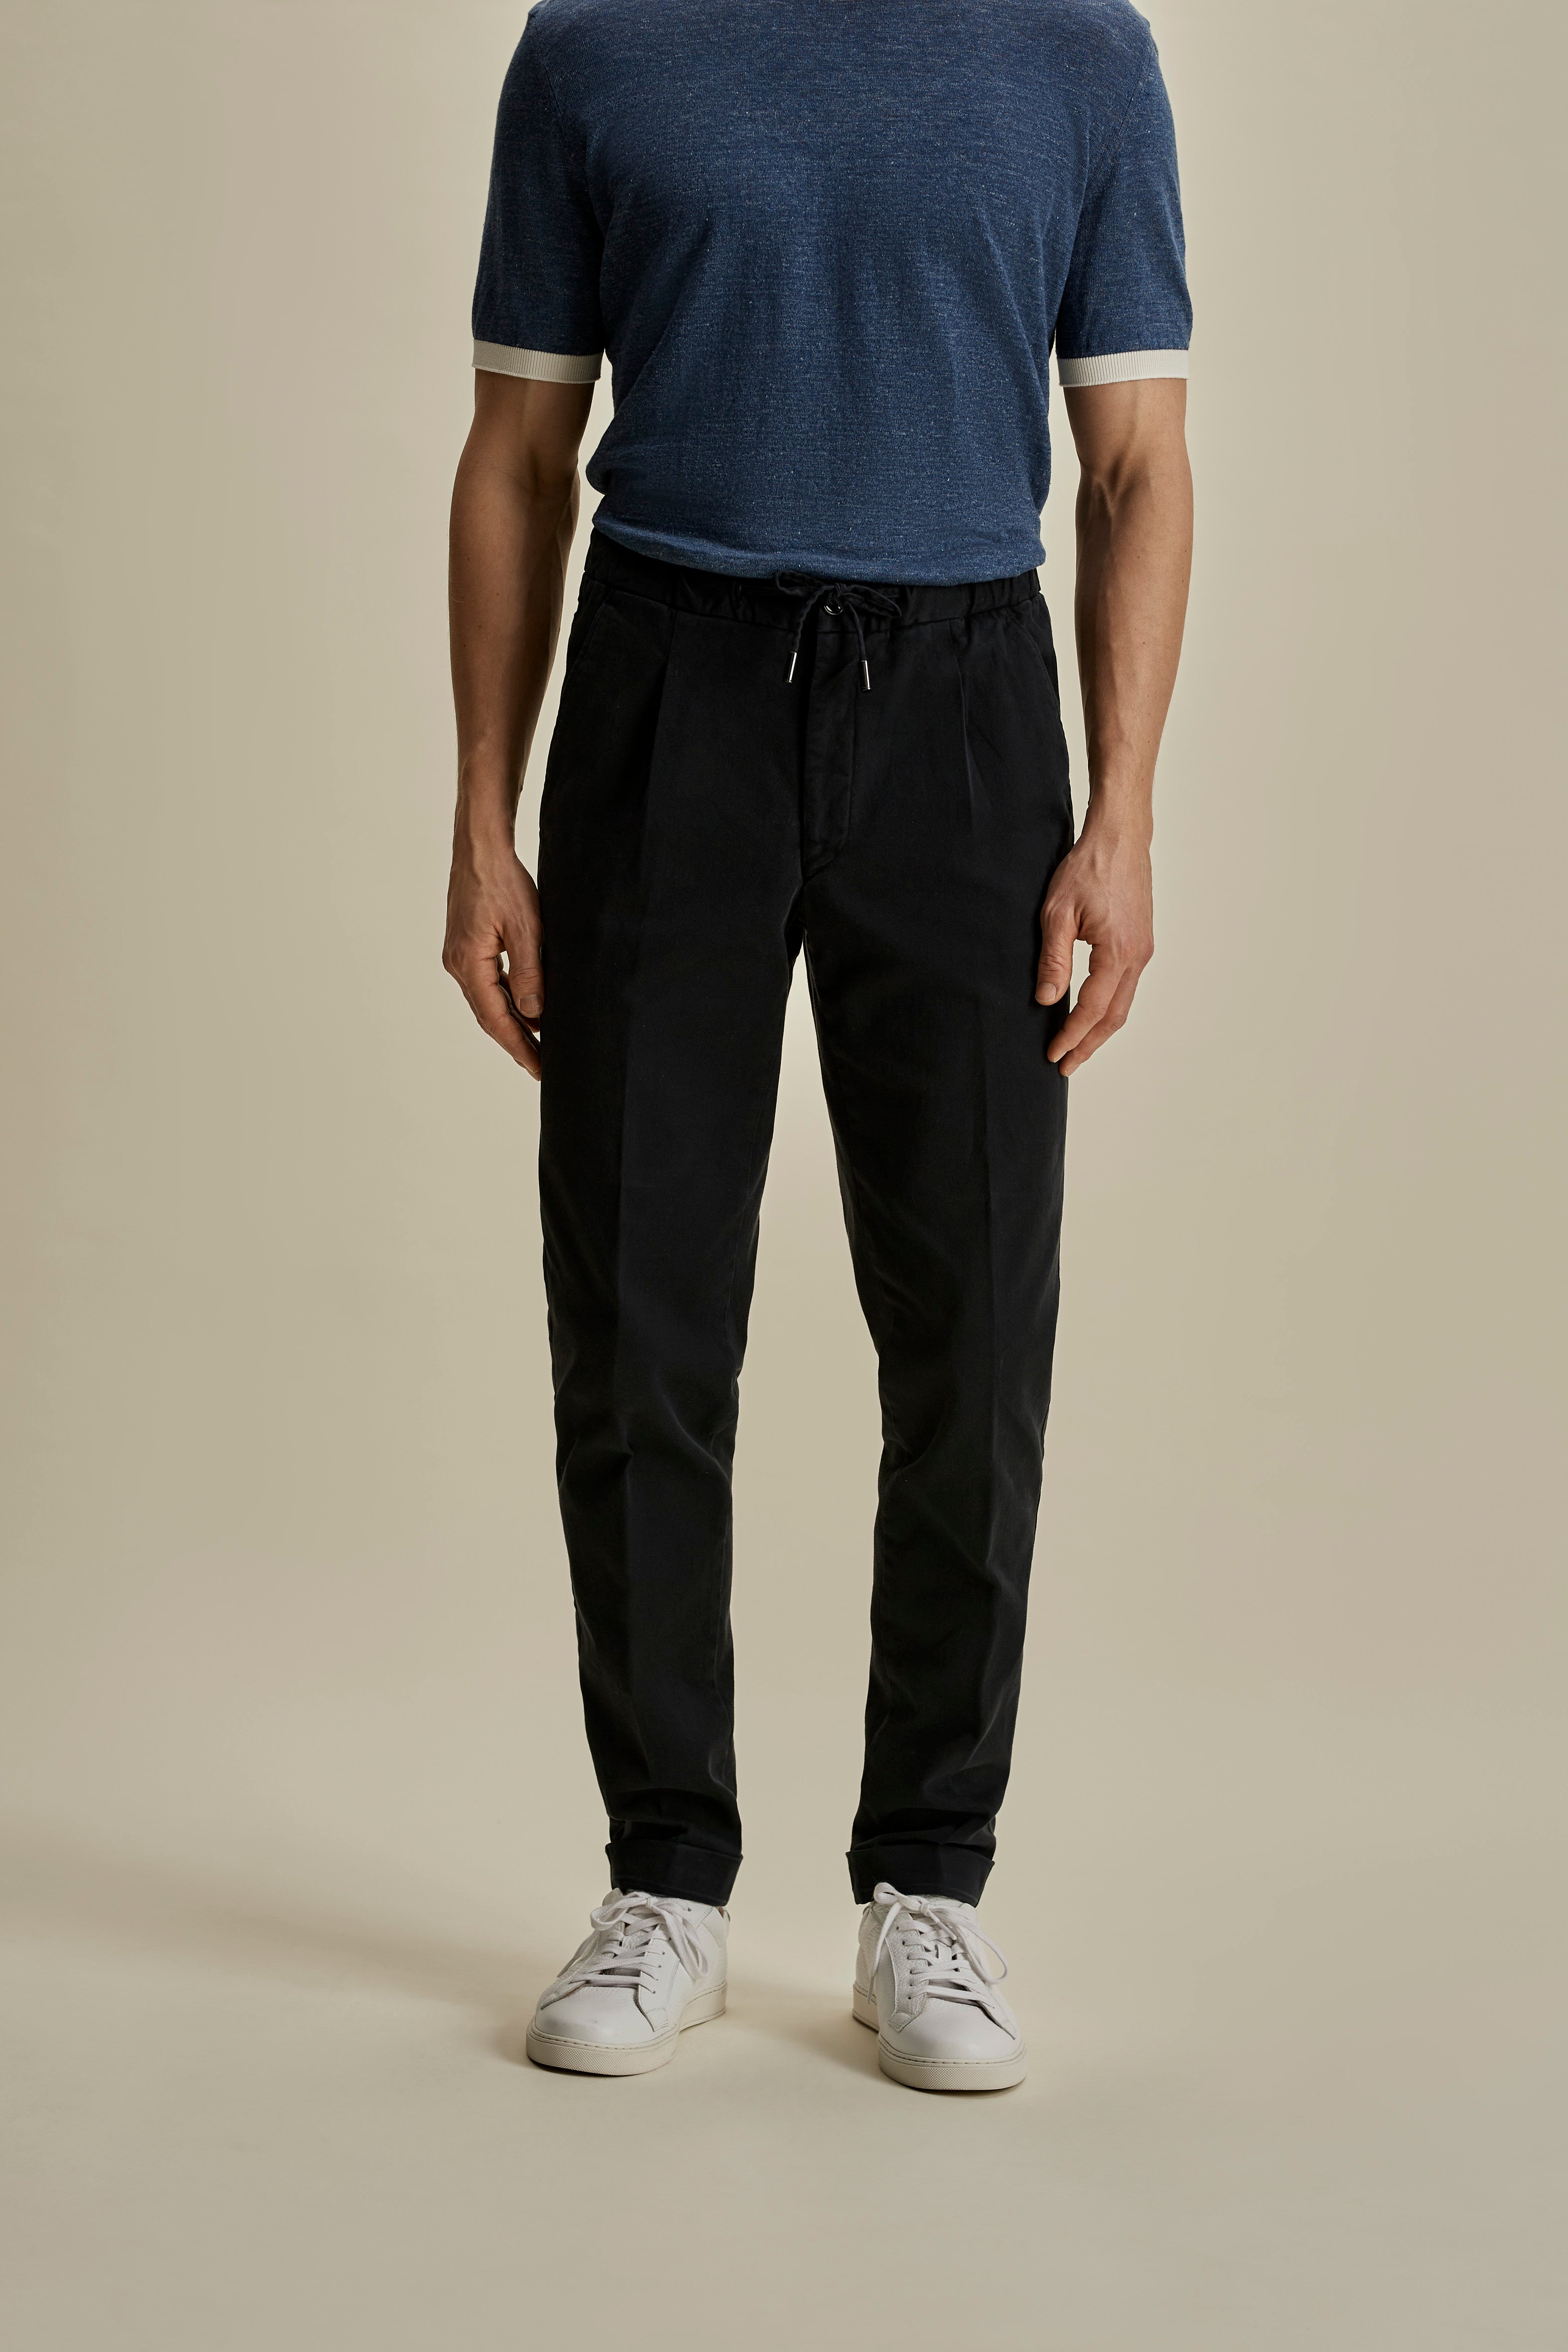 Cotton Twill Drawstring Tailored Trousers Navy Mid Crop Model Image